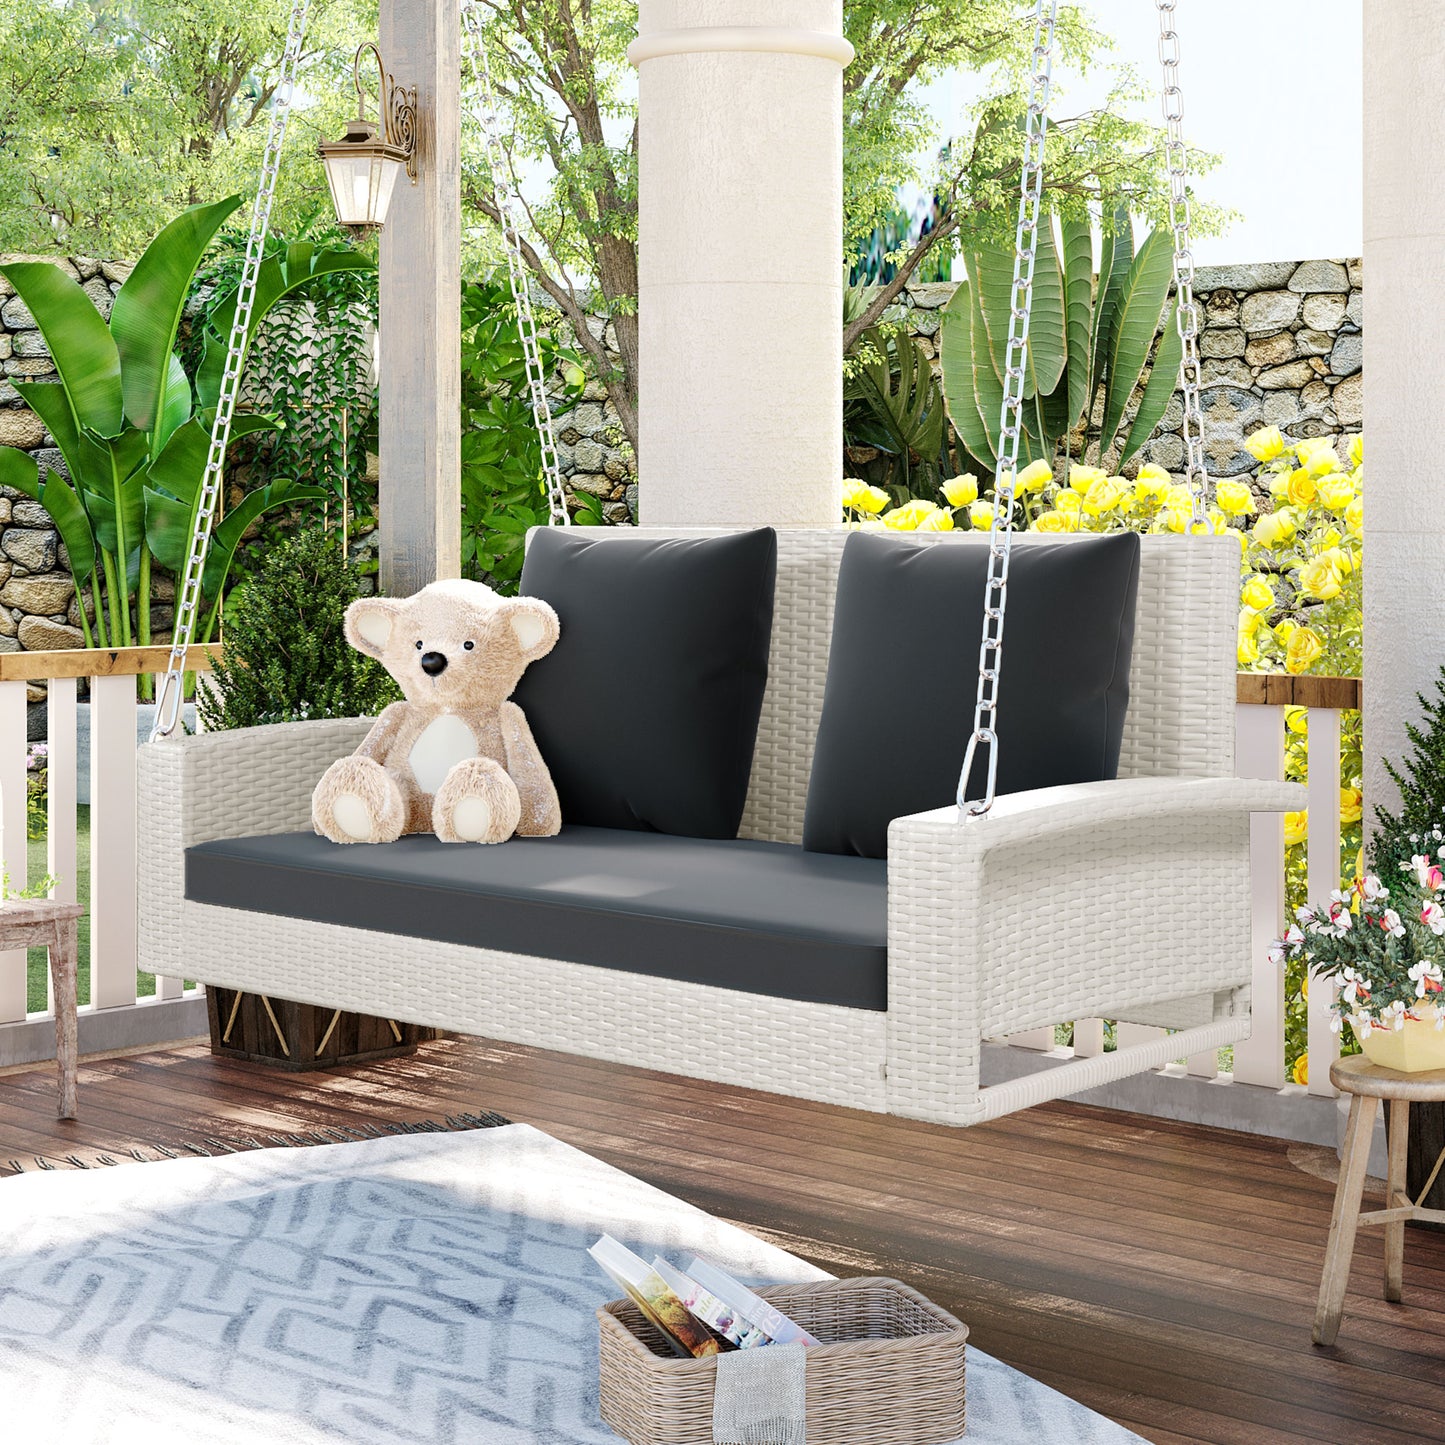 2-Person Wicker Porch Hanging Swing, Outdoor Swing Bench Chair with Gray Cushions and Chains, Heavy Duty Hammock Chair for Backyard, Garden, Balcony, White, D7407